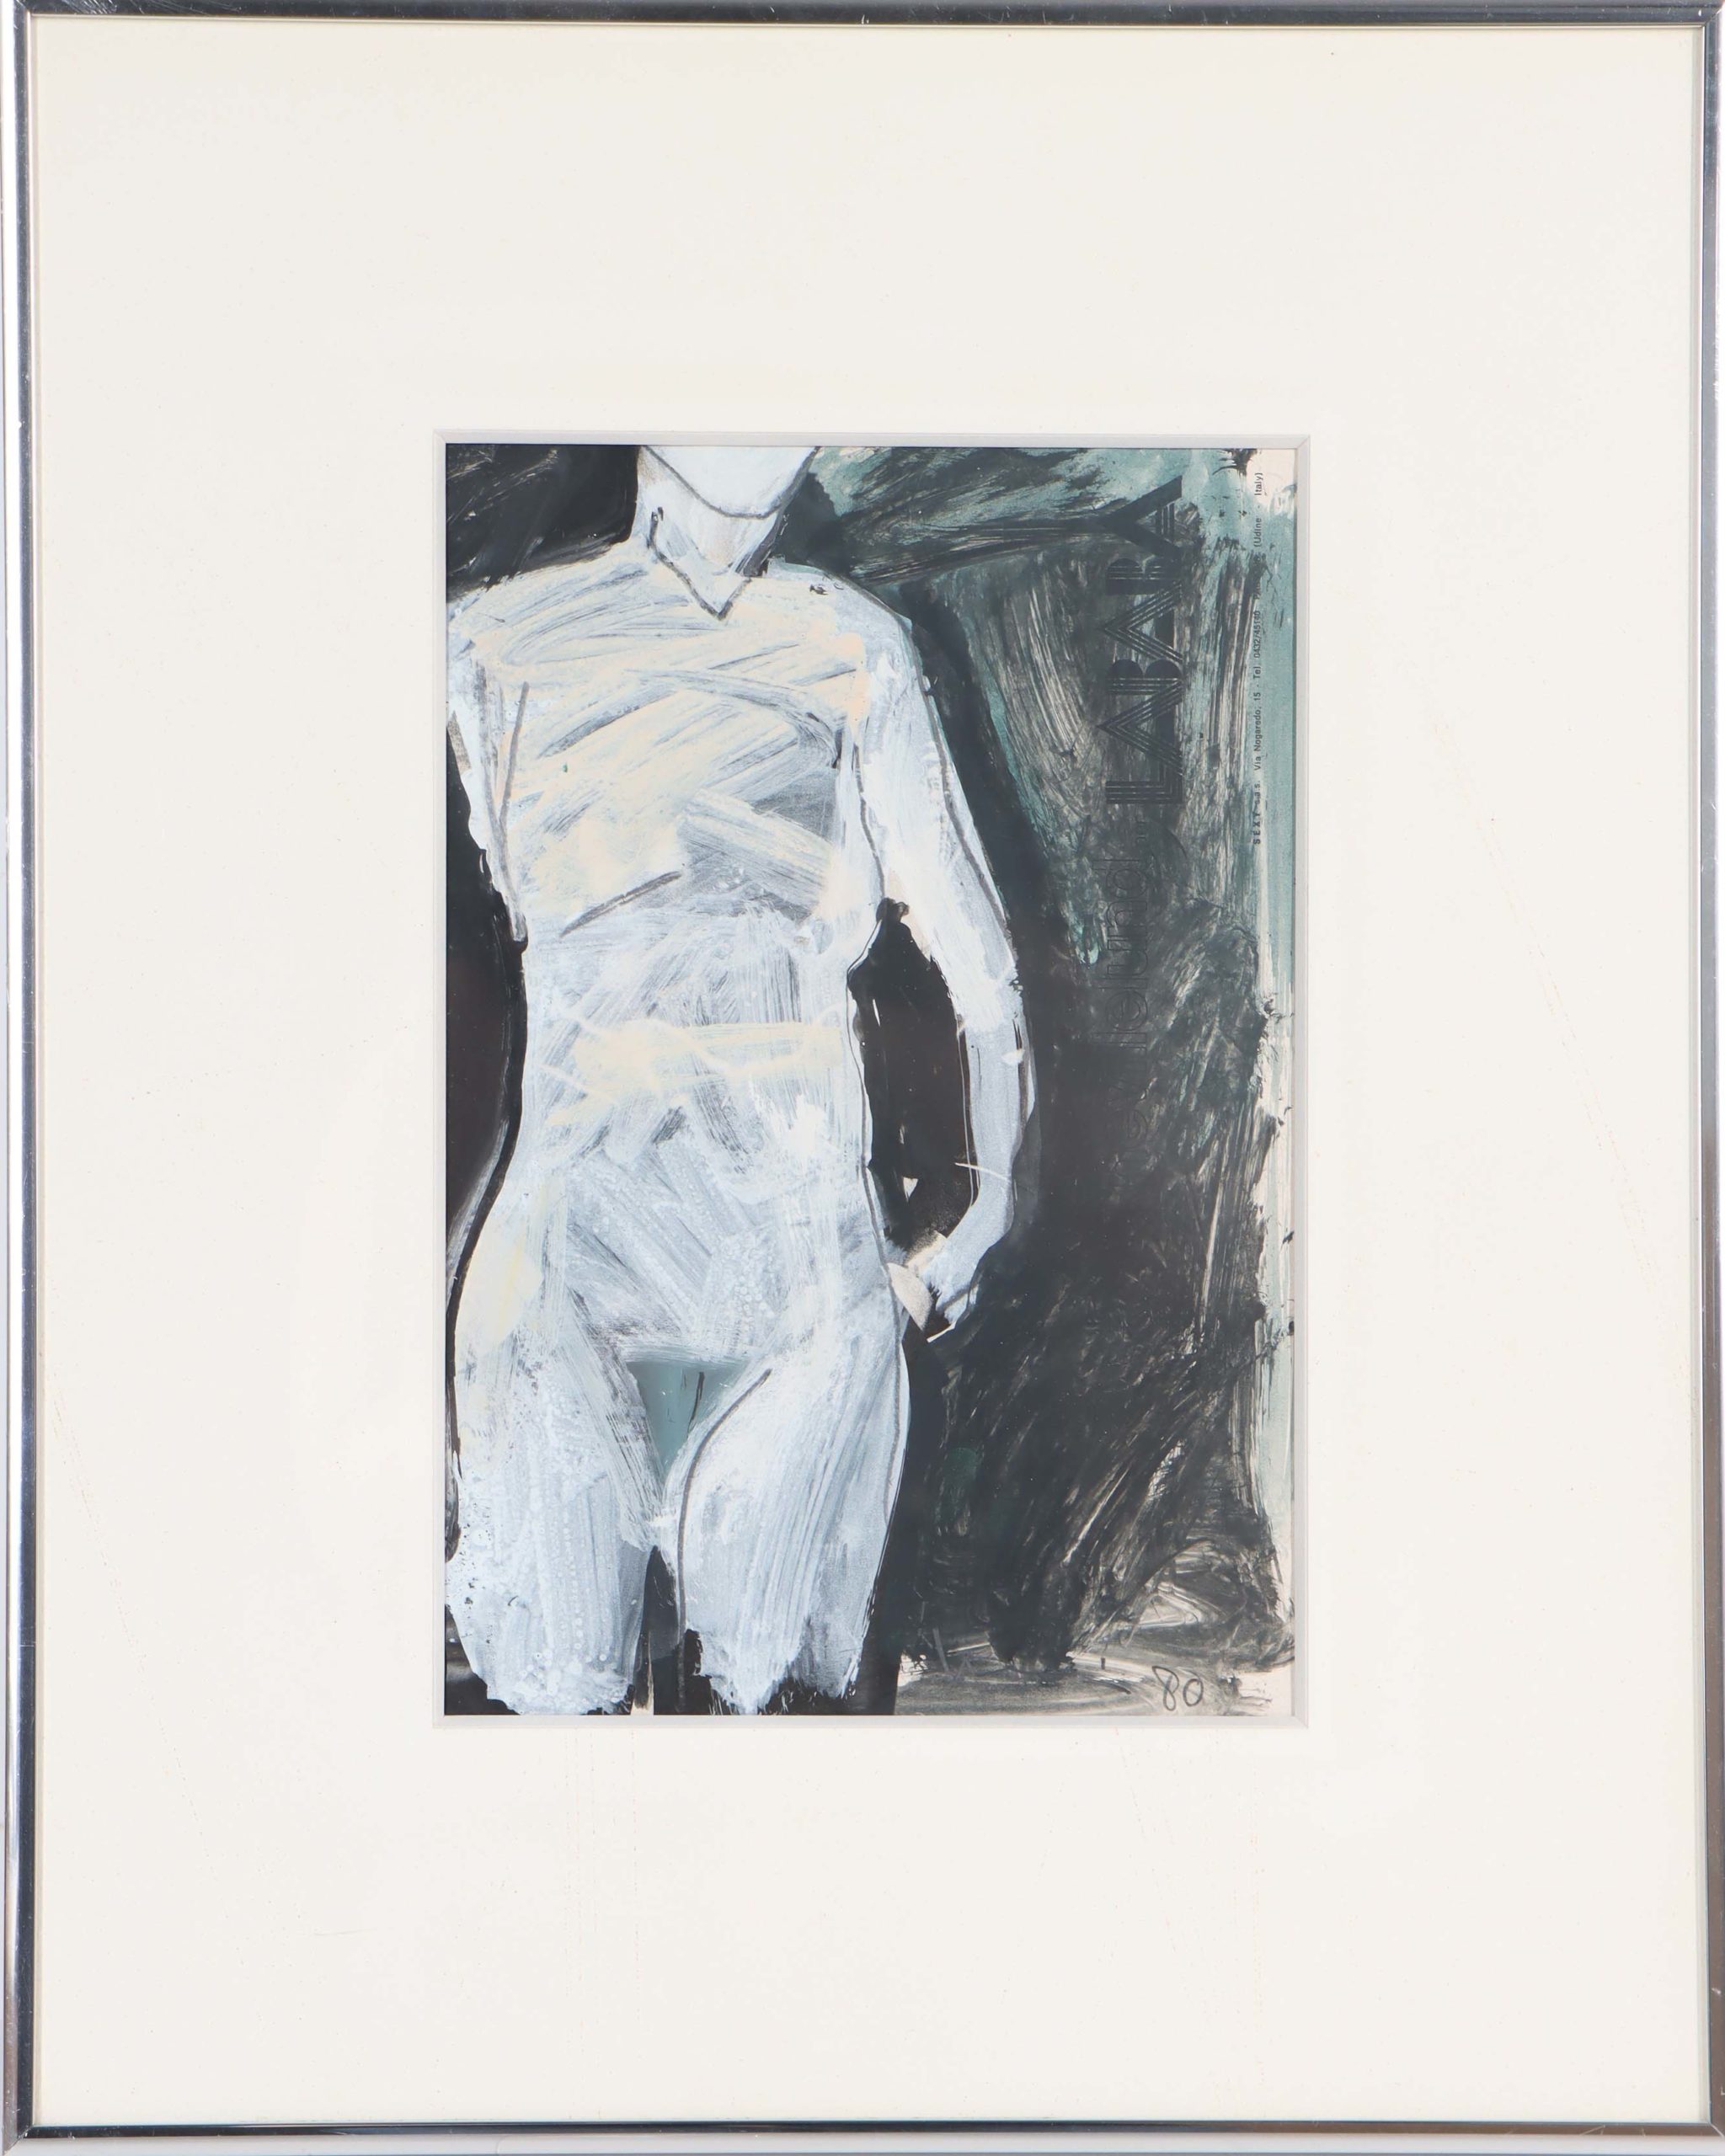 You are currently viewing Manuel Neri (b 1930) Mixed Media on Paper “Gesture Study No. 44”